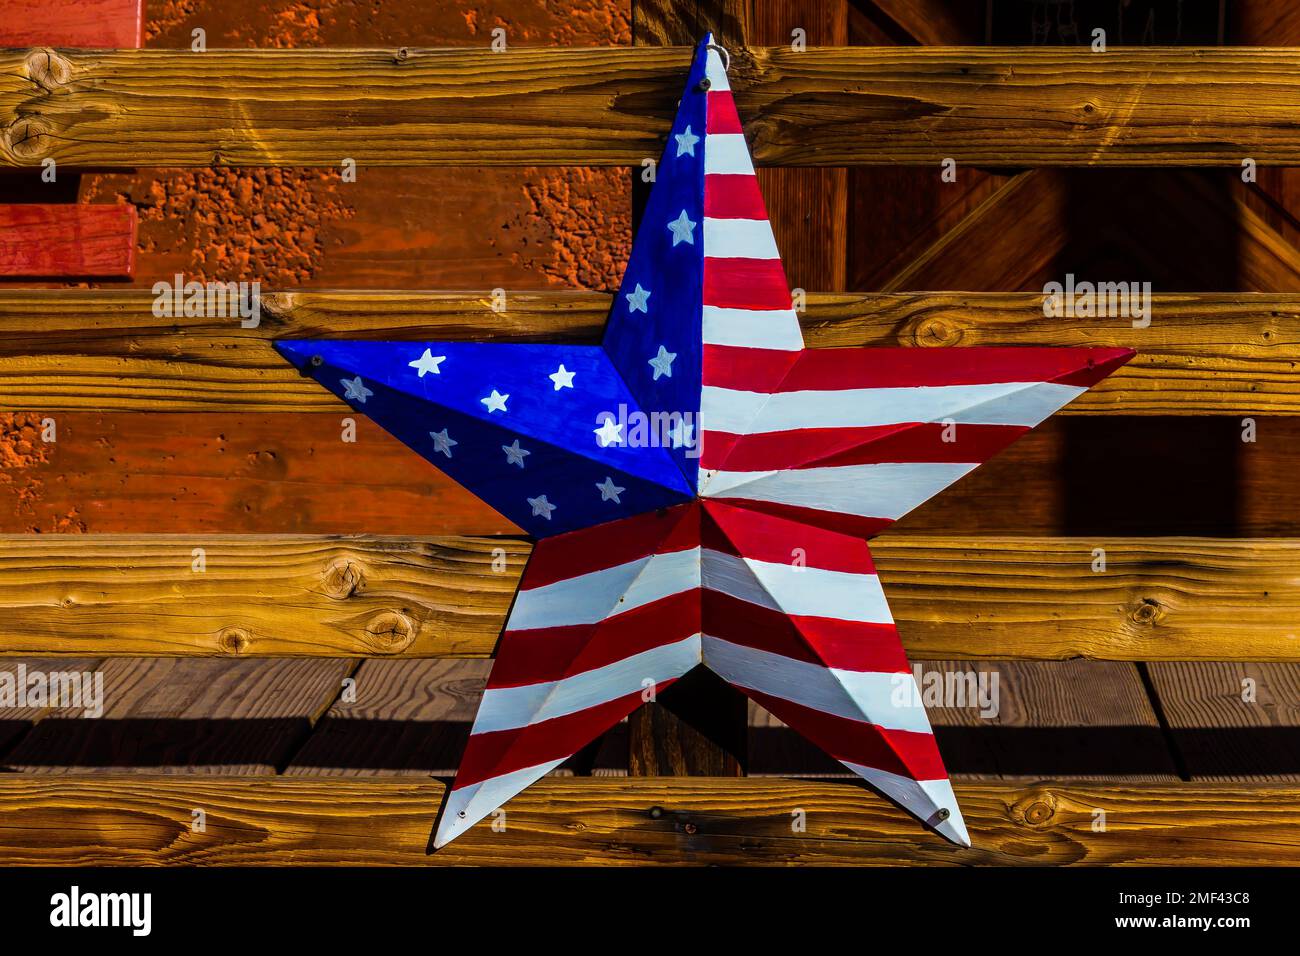 American Star On Wooden Fence Stock Photo